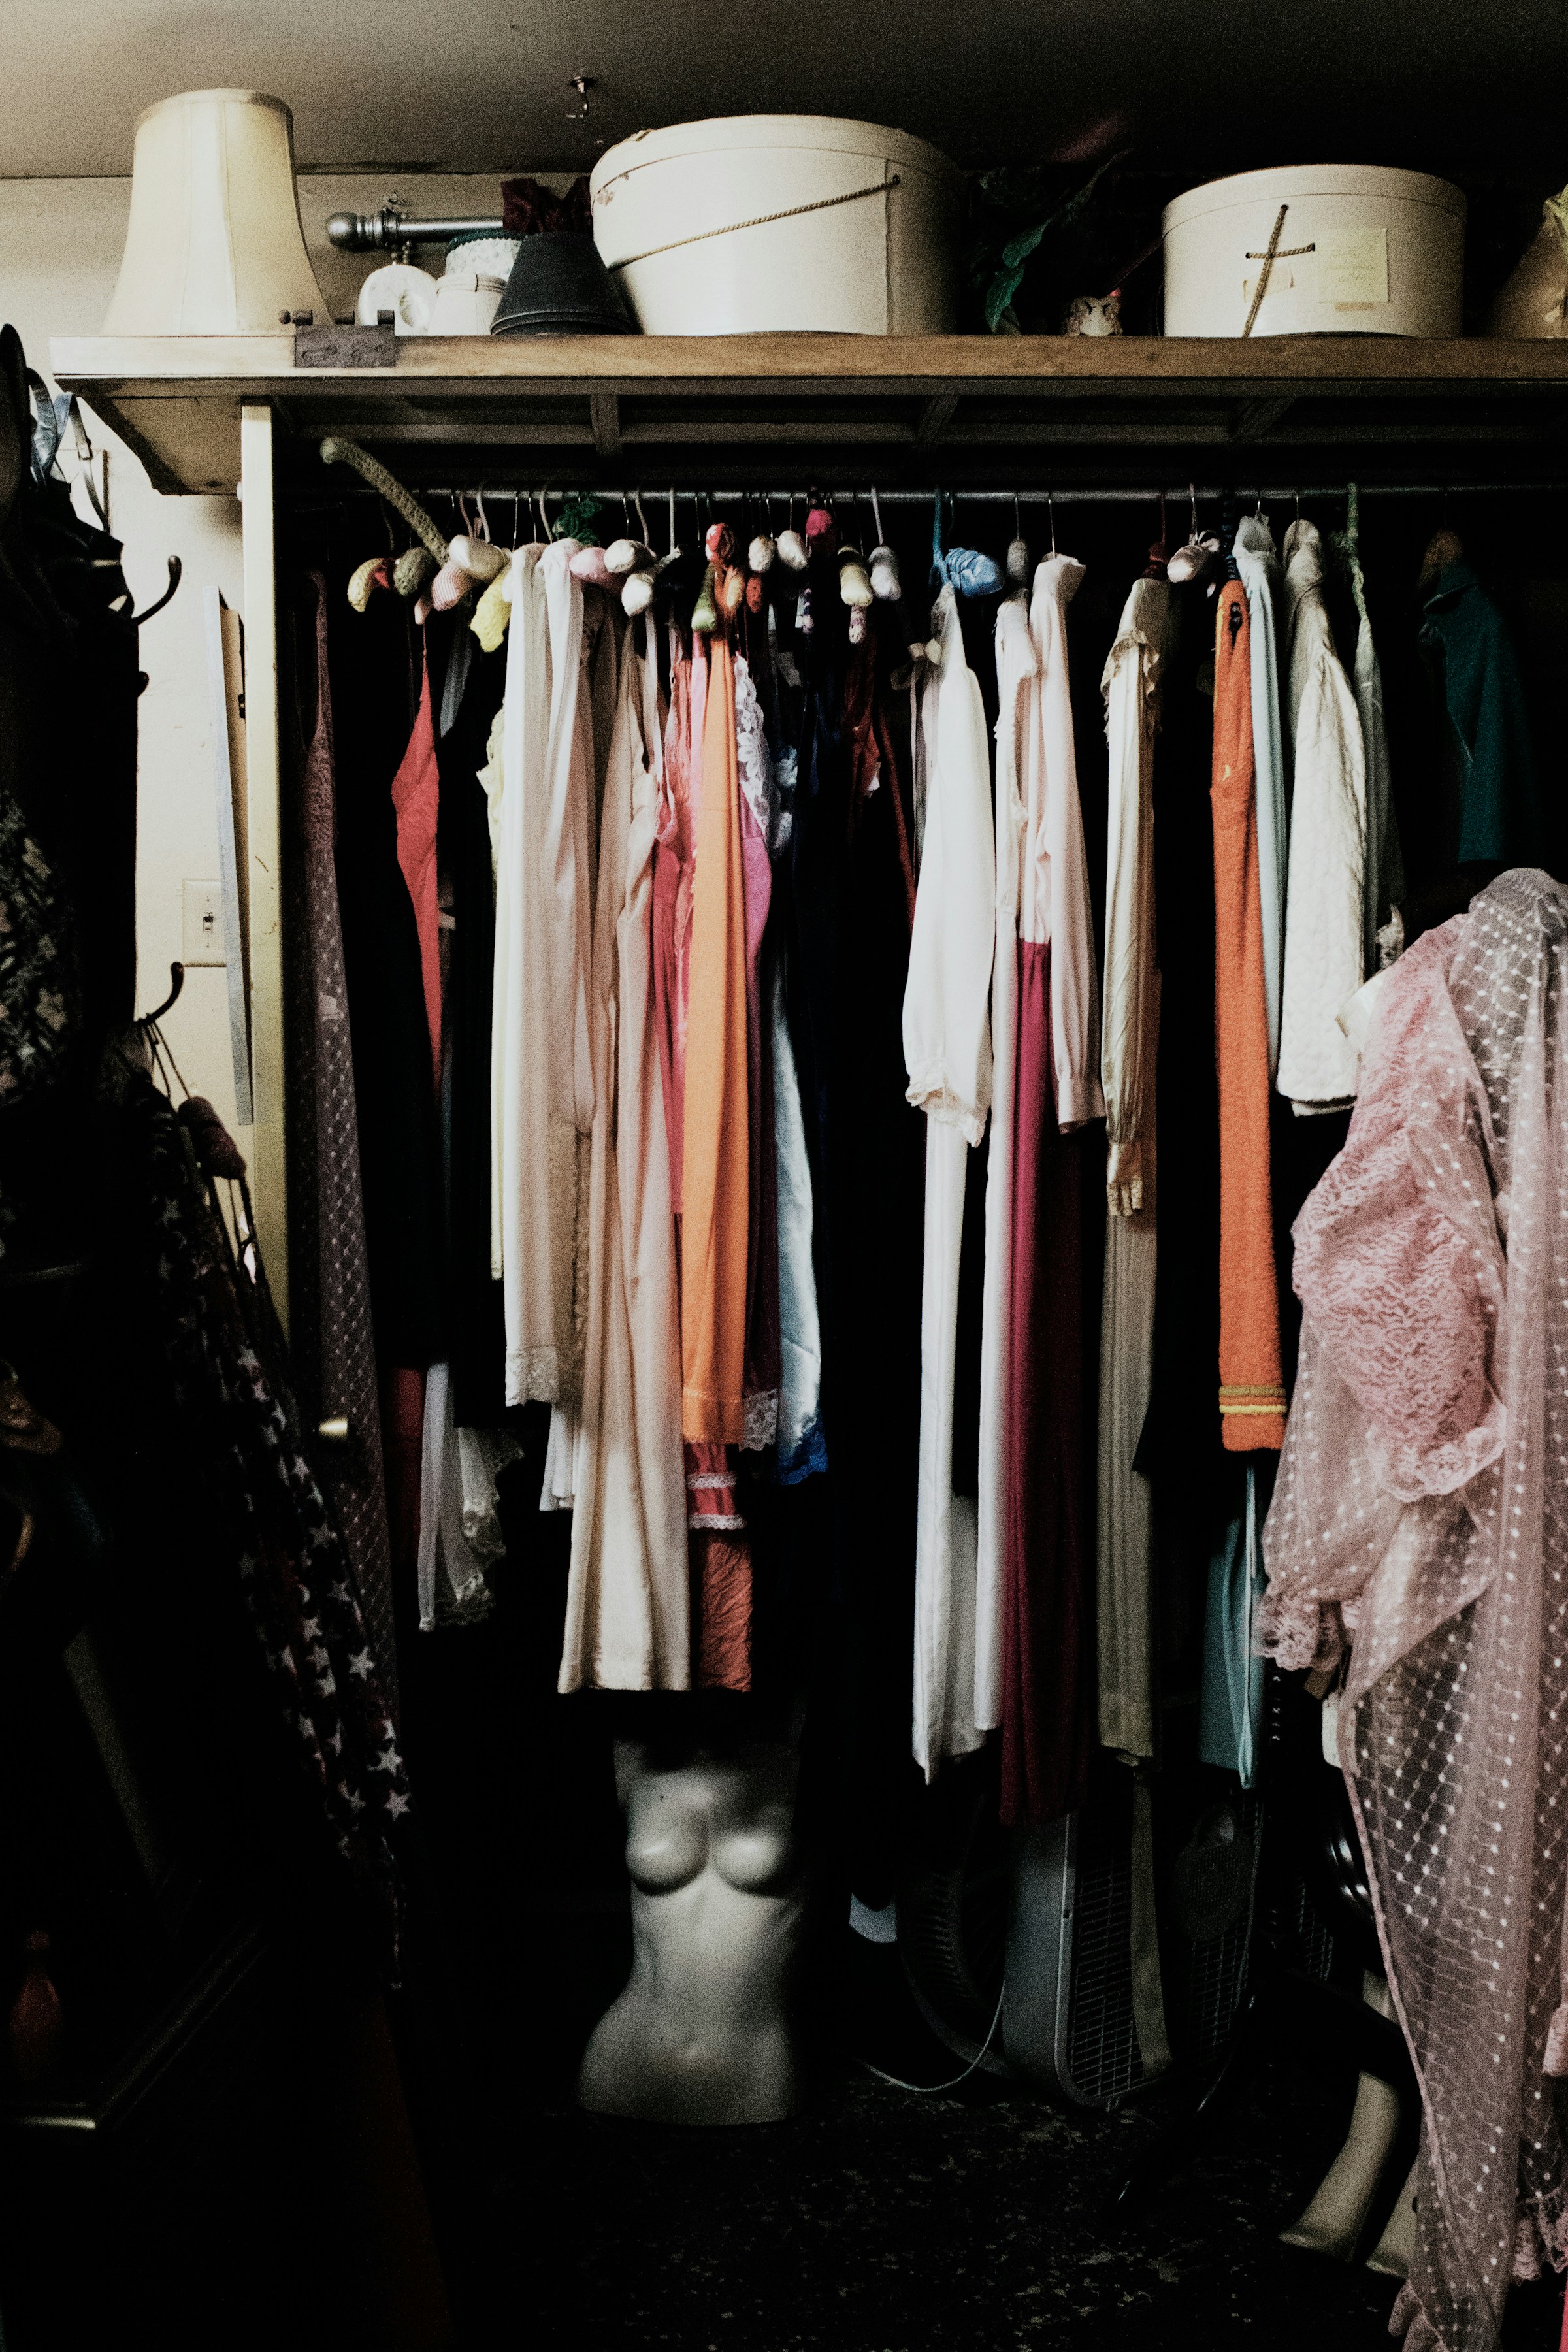 Clothes hanging in a closet | Source: Unsplash